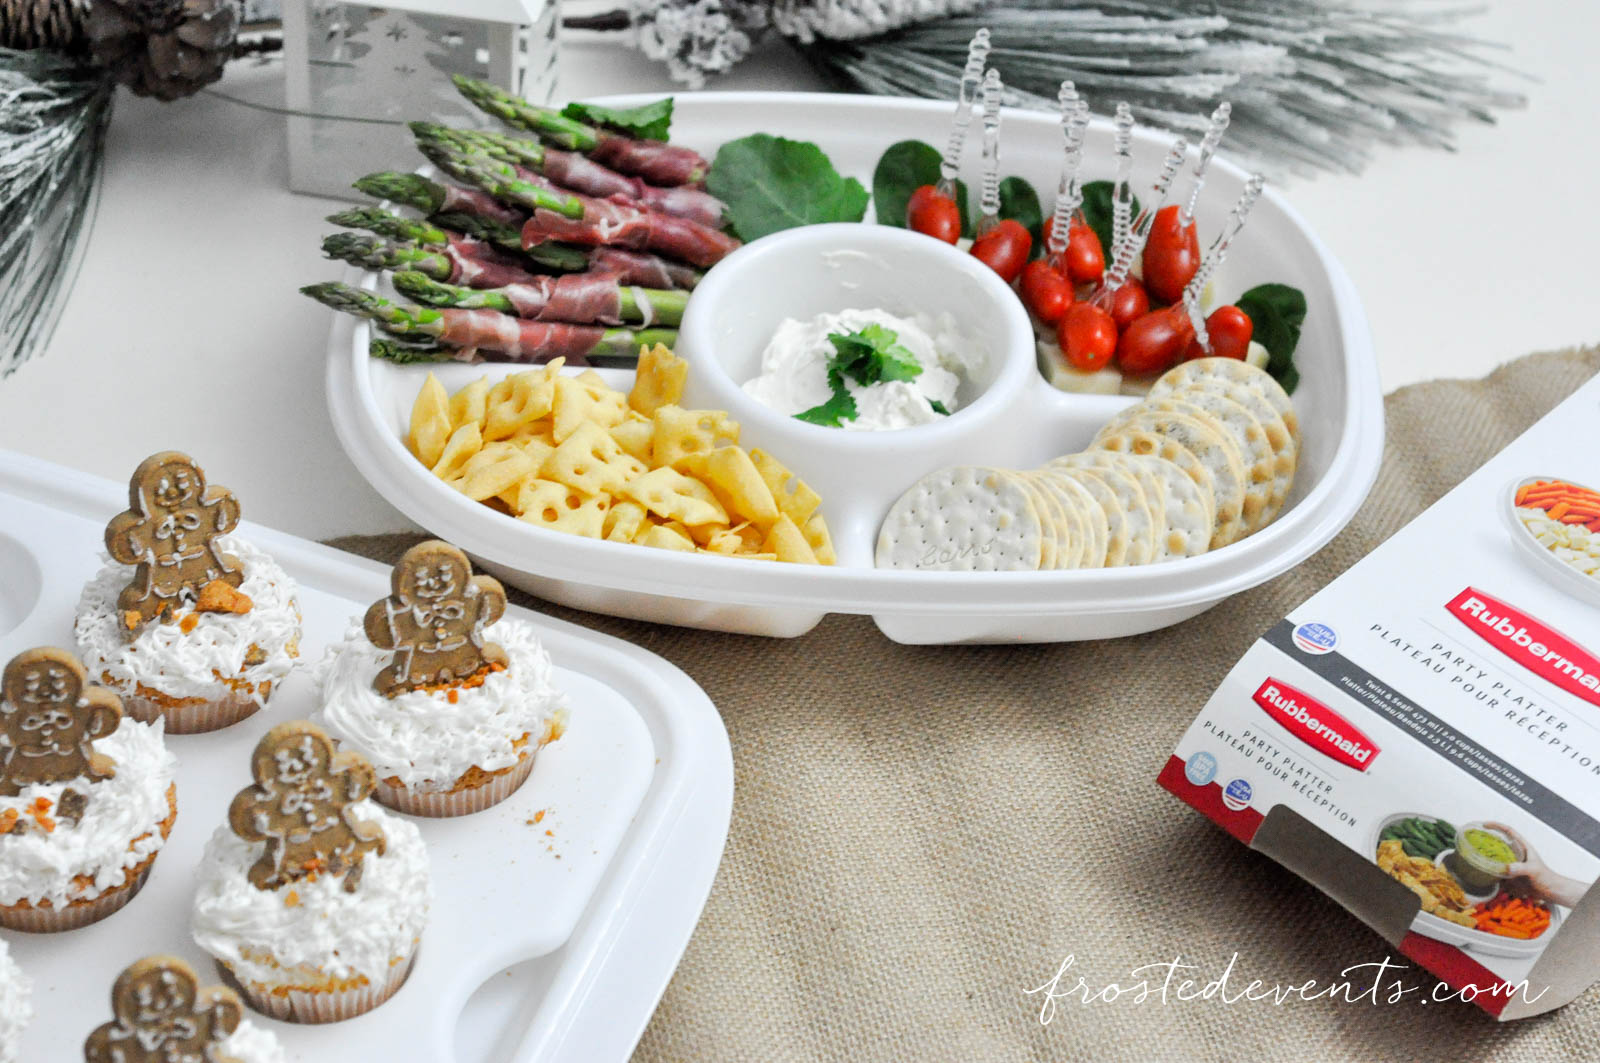 Party Food Ideas and Packing Platters with Rubbermaid Serving Containers